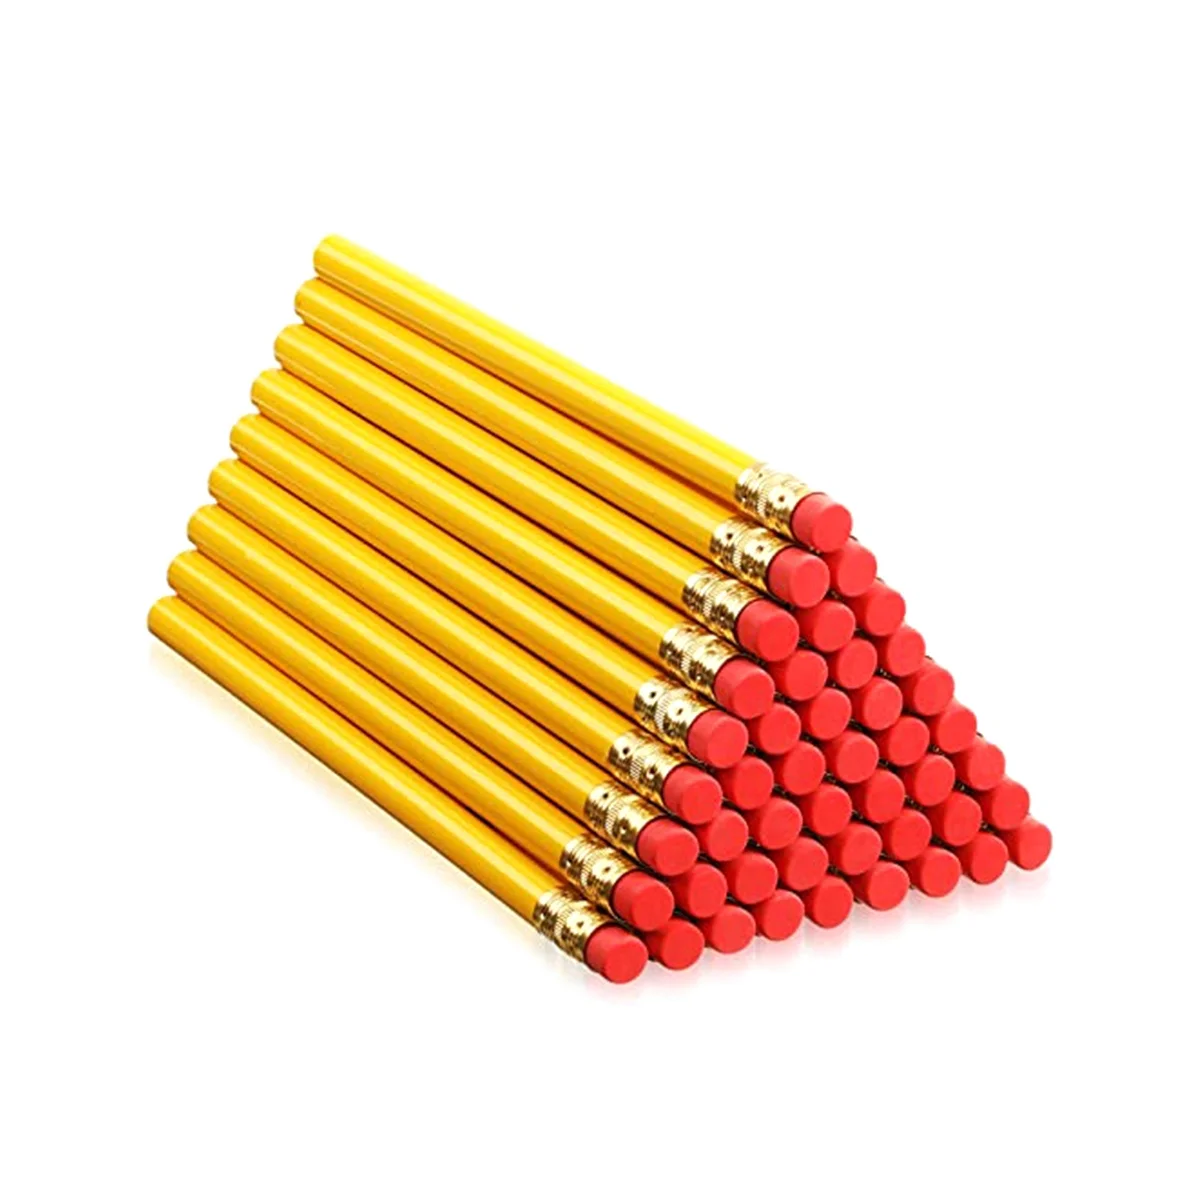 

100 Pcs Round Pencil Wooden Pencil with Black Core for Construction Workers Woodworkers Framers Beginners